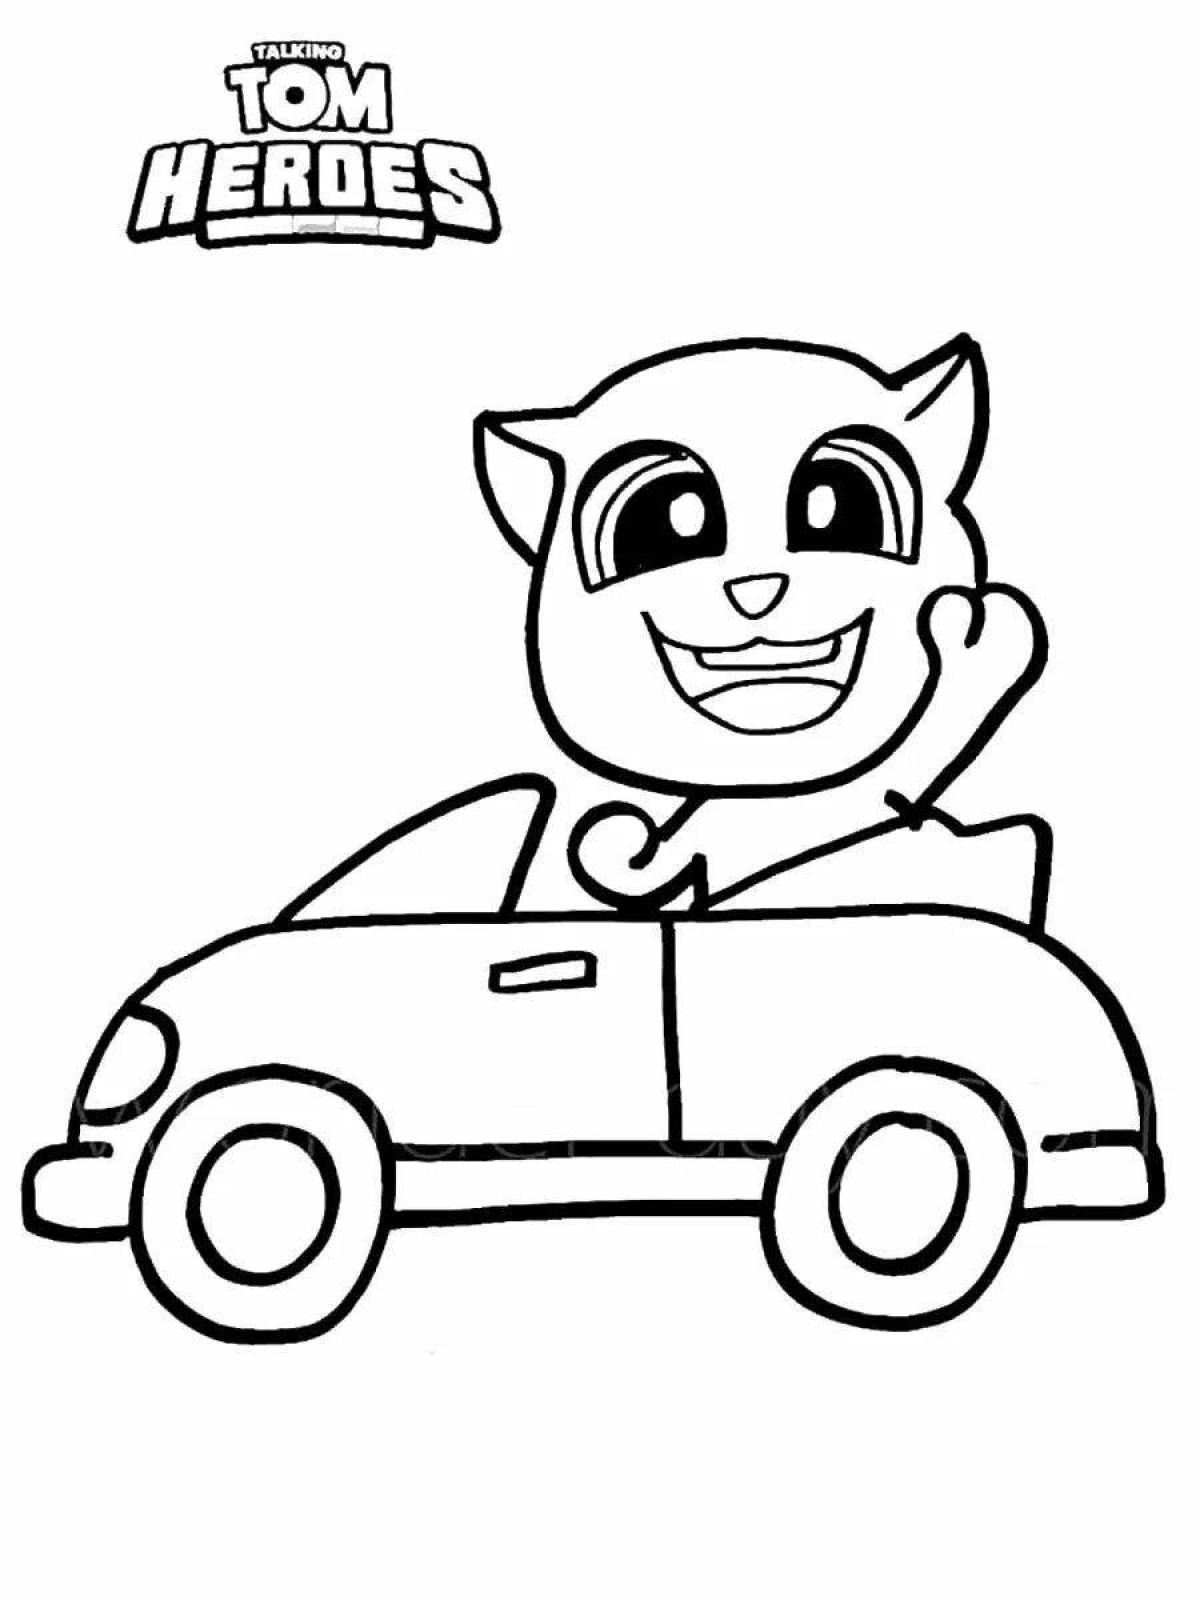 Colorful talking tom hero coloring page